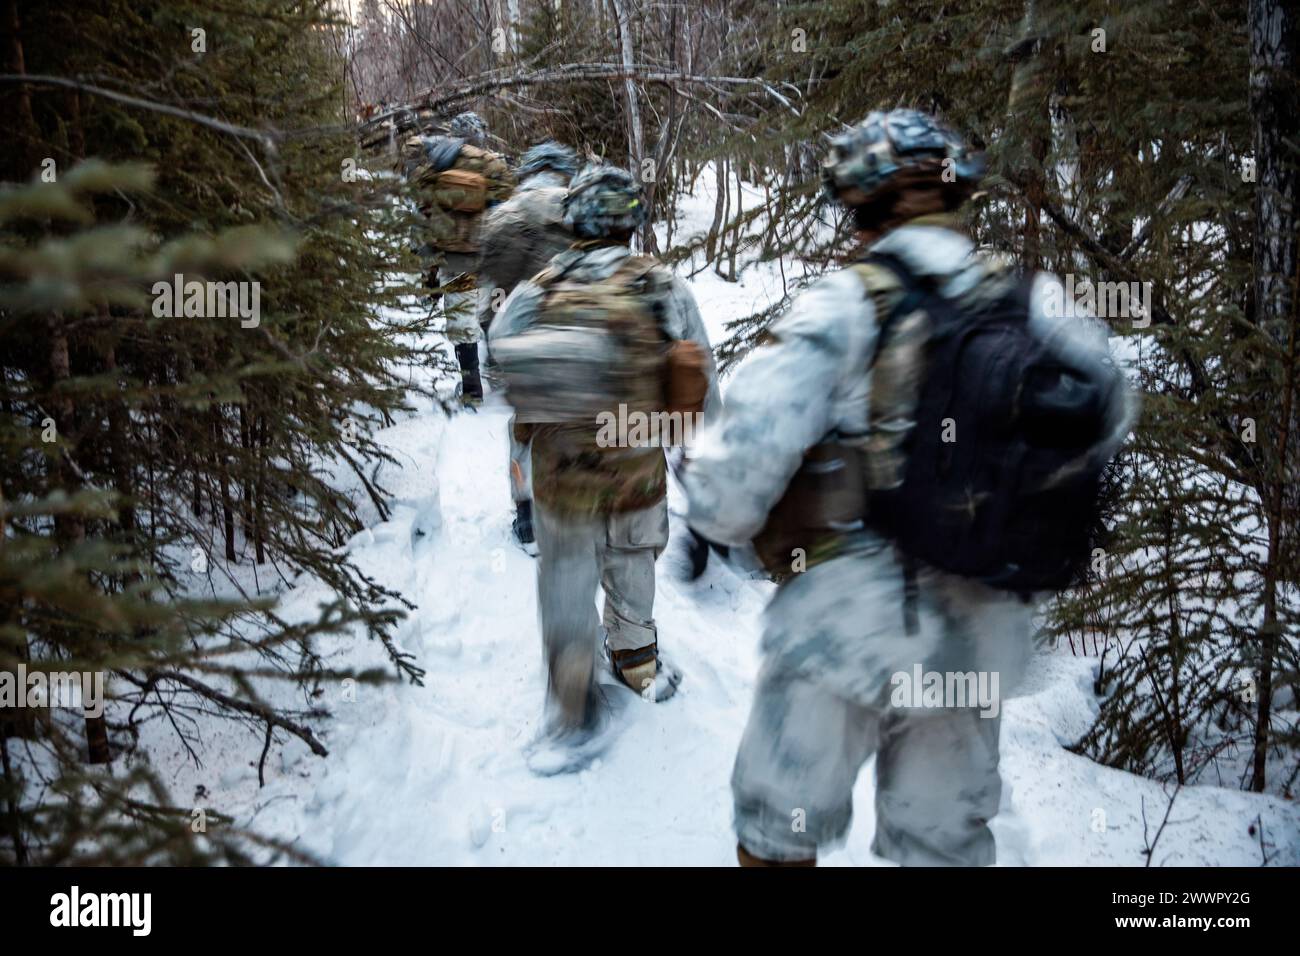 U.S. Soldiers, assigned to 1st Battalion, 5th Infantry Regiment, 1st Infantry Brigade Combat Team, 11th Airborne Division, push forward through a forest during Joint Pacific Multinational Readiness Center 24-02 at Donnelly Training Area, Alaska, Feb. 17, 2024. JPMRC 24-02 is held in the coldest part of the Alaskan winter, exposing roughly 10,000 joint, multi-national service members to unforgiving conditions, transferring the division’s expertise in the Arctic in support of the Army, the DoD and the Nation’s Arctic and Defense Strategies.  Army Stock Photo